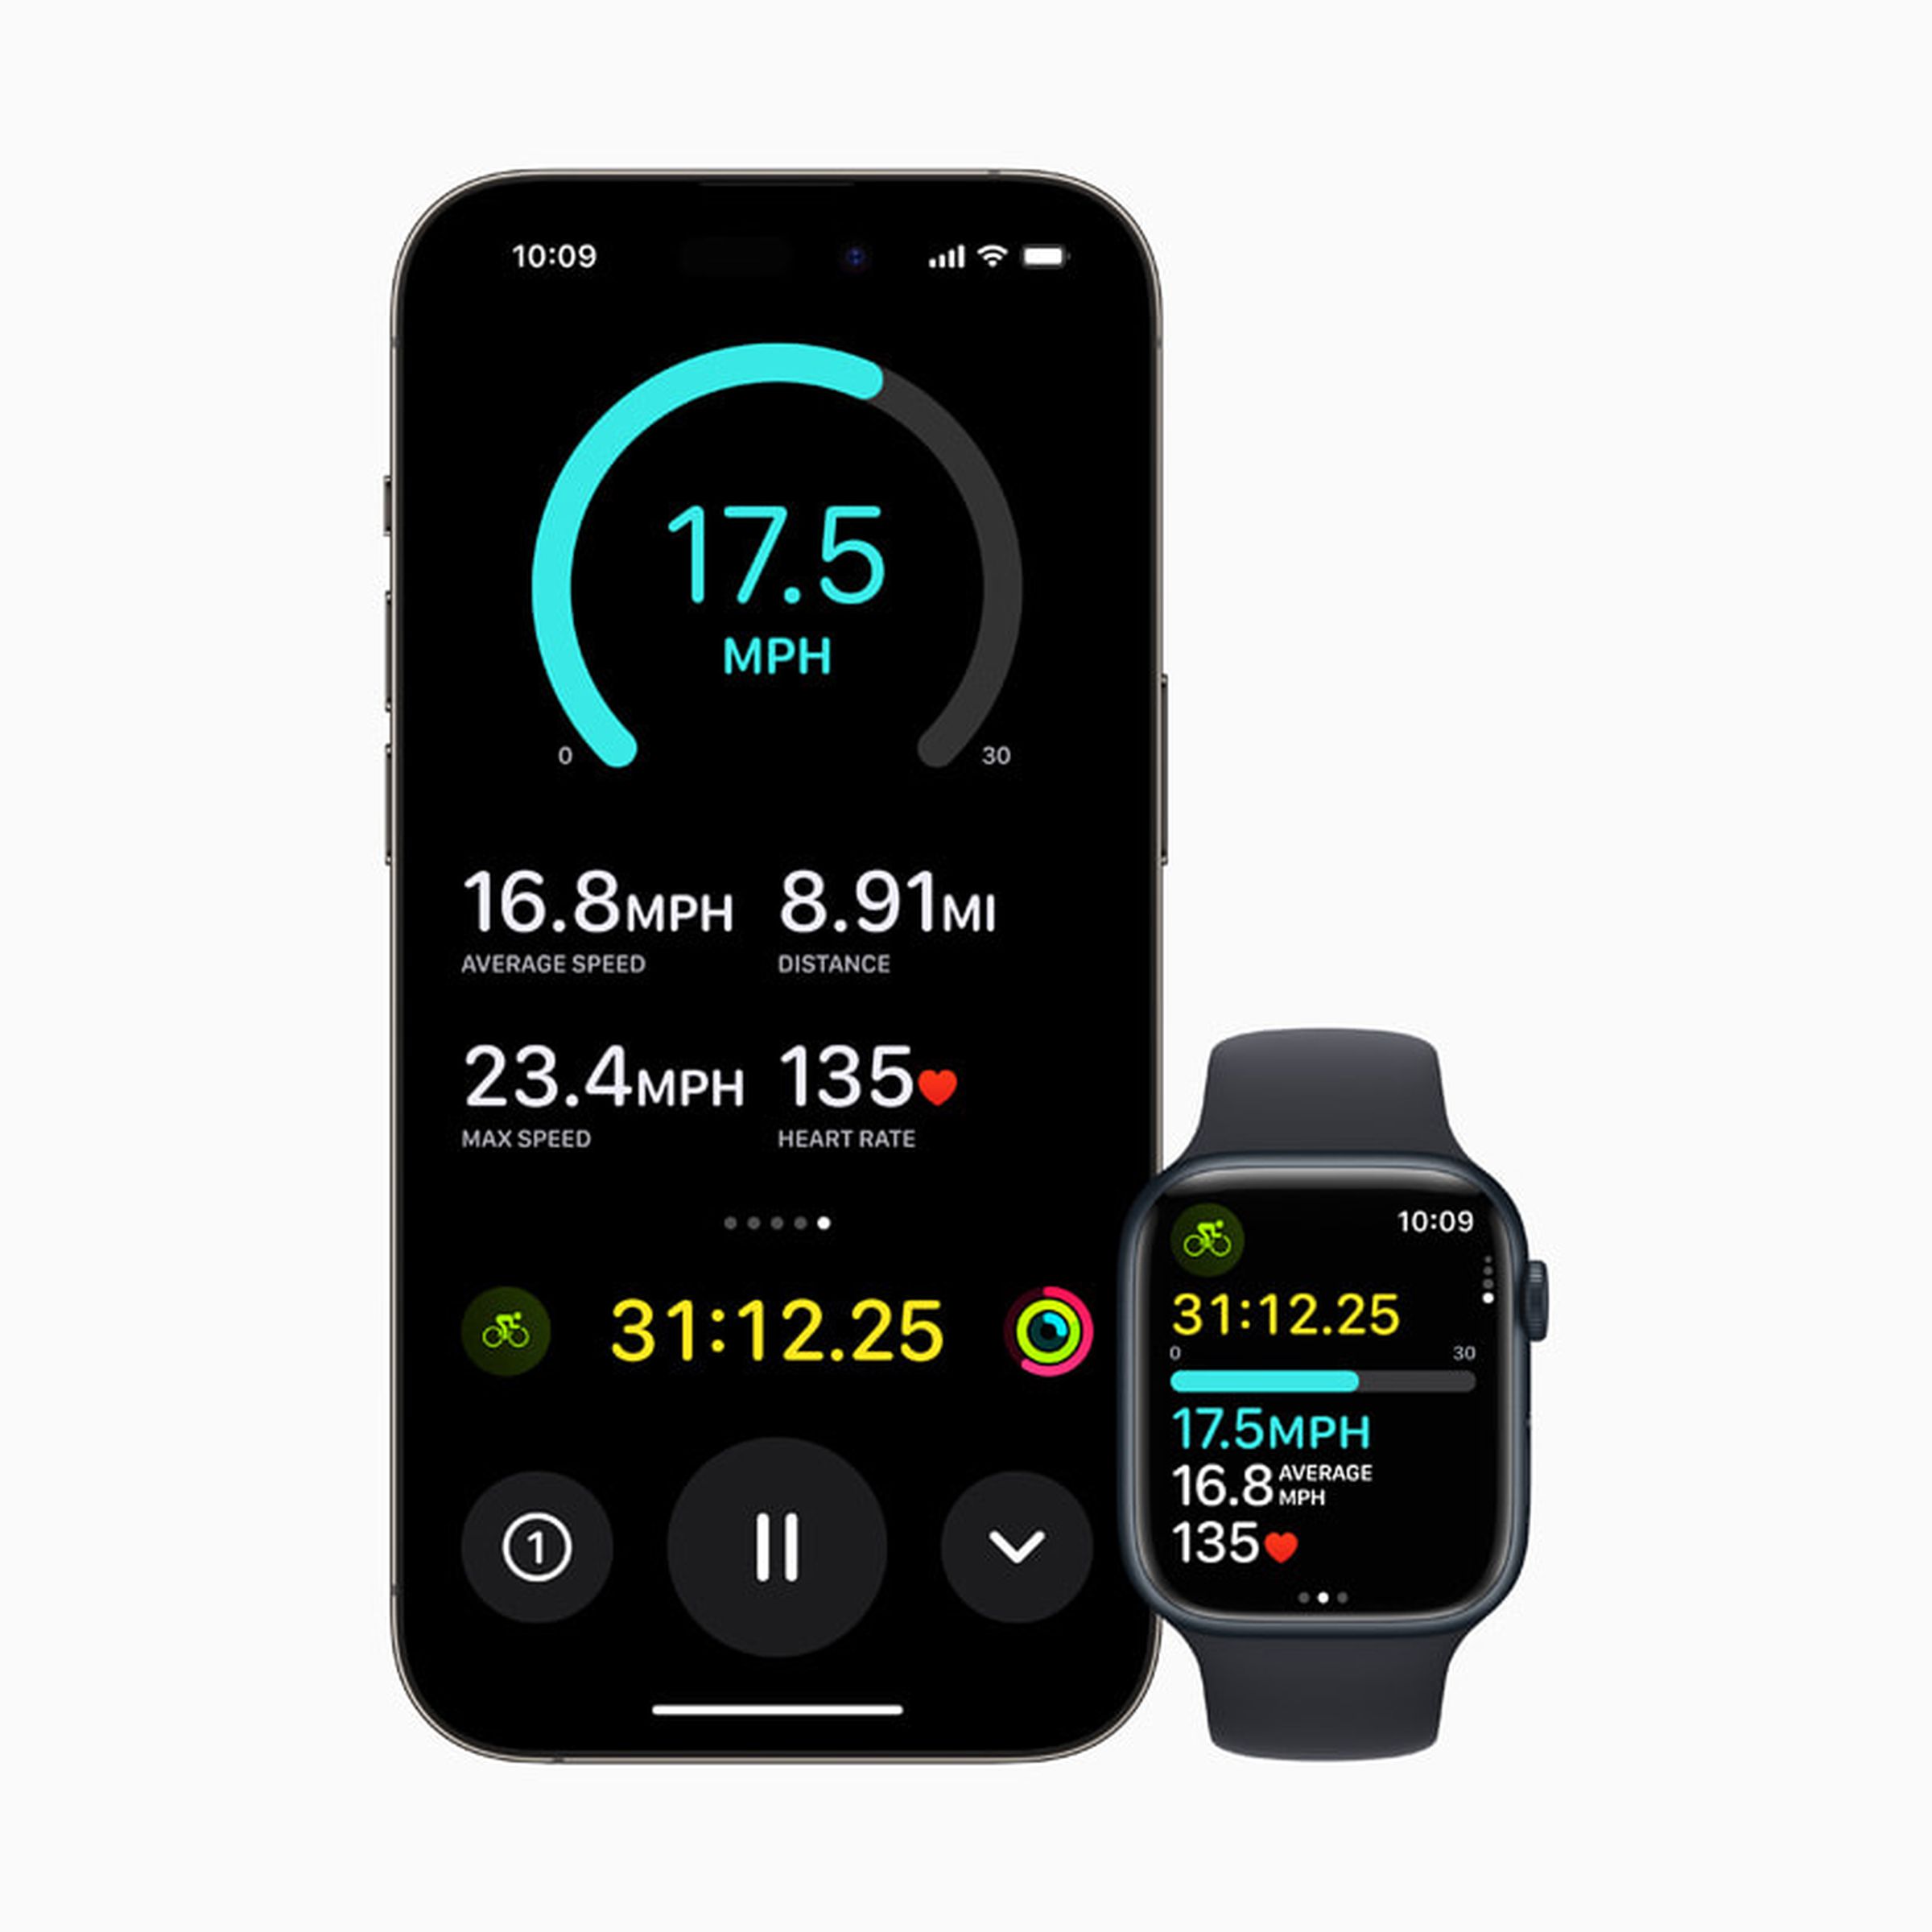 Render of iPhone showing Cycling views next to Apple Watch